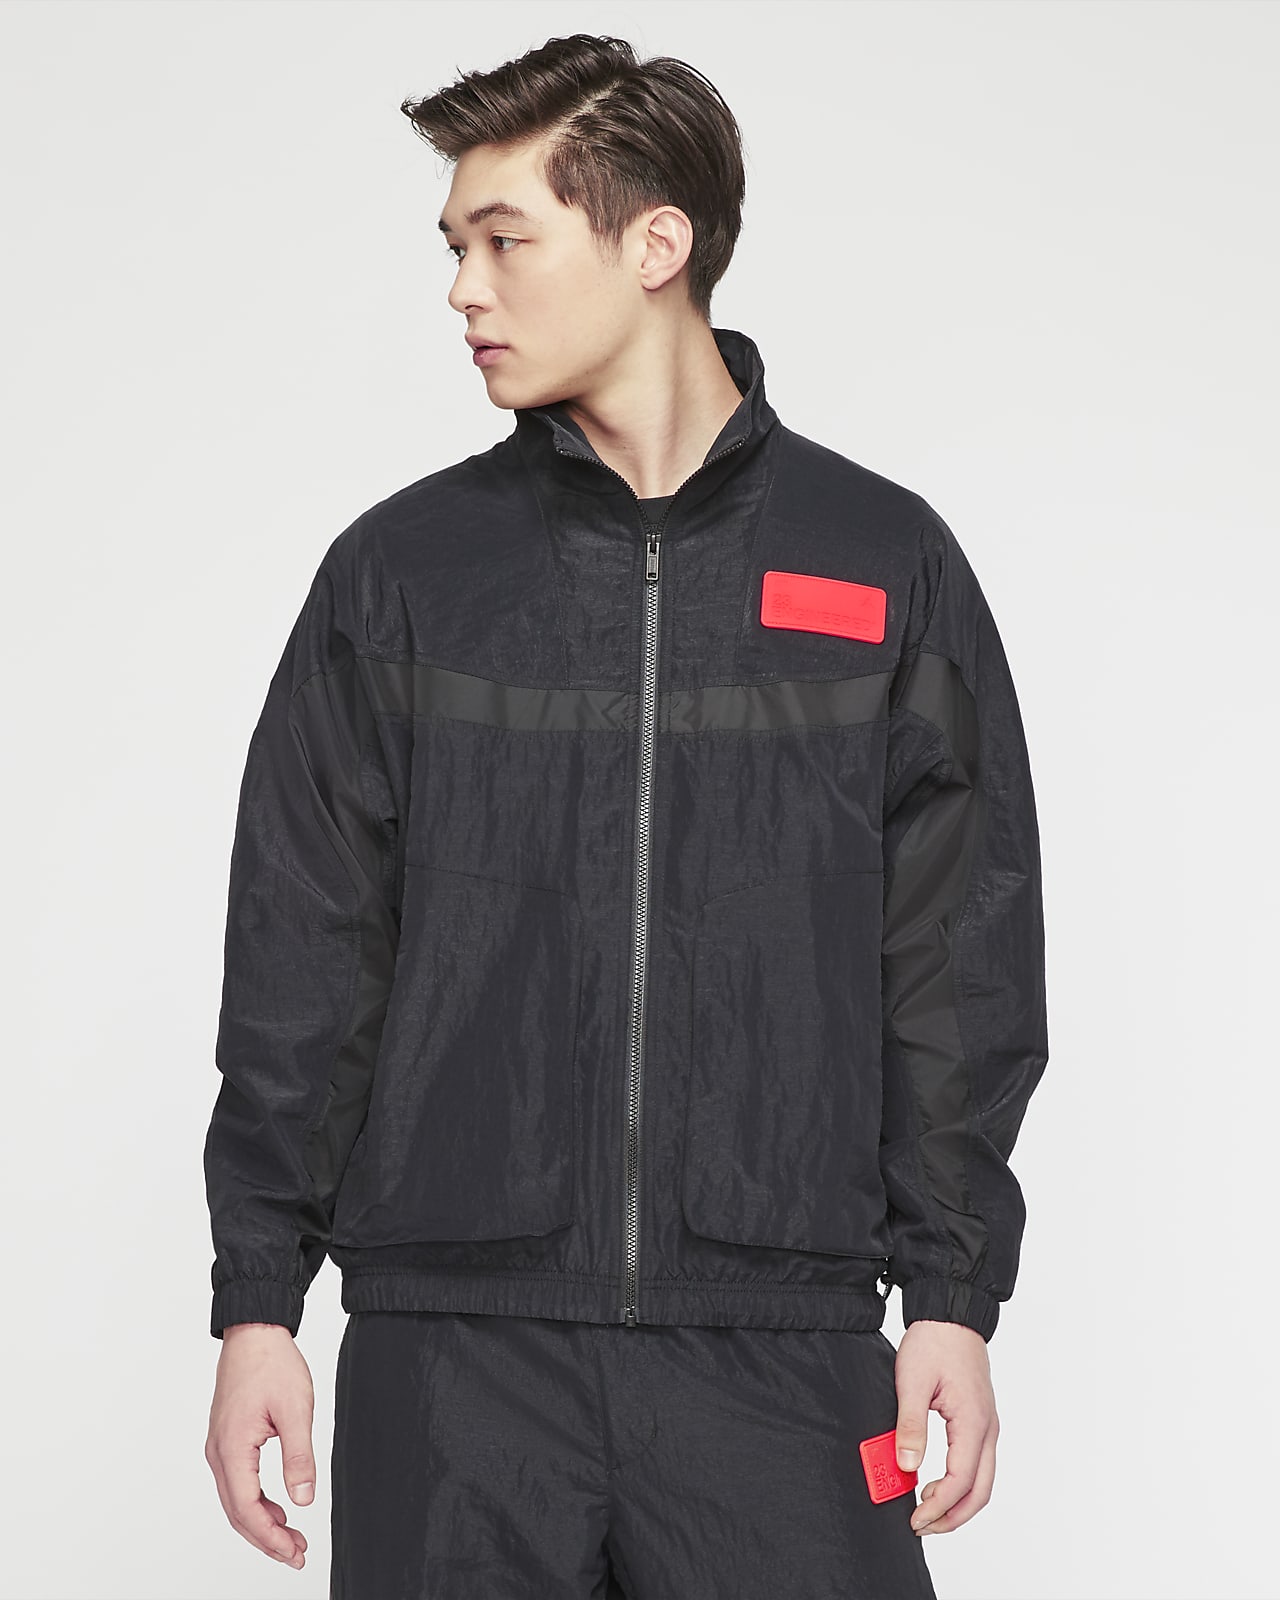 adidas micropacer jacket